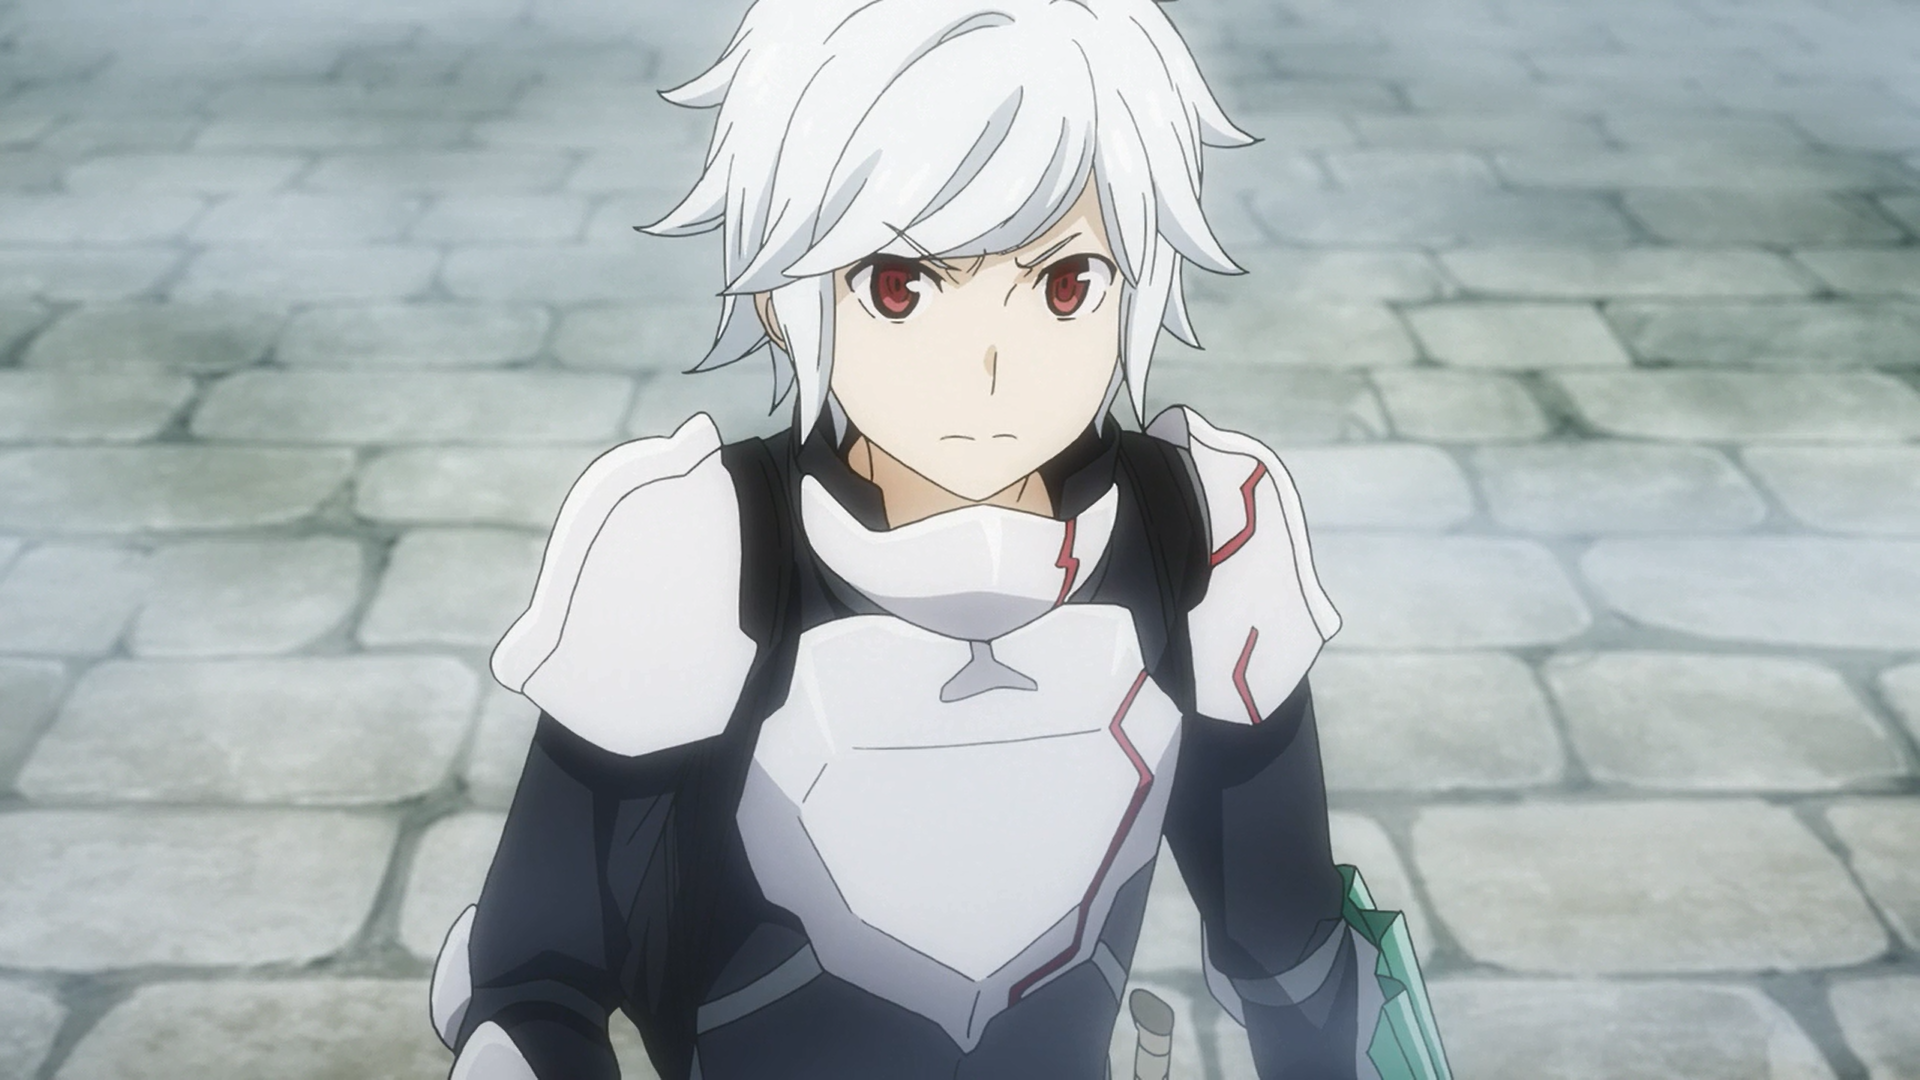 DanMachi season 4 release date confirmed with new Dungeon anime trailer